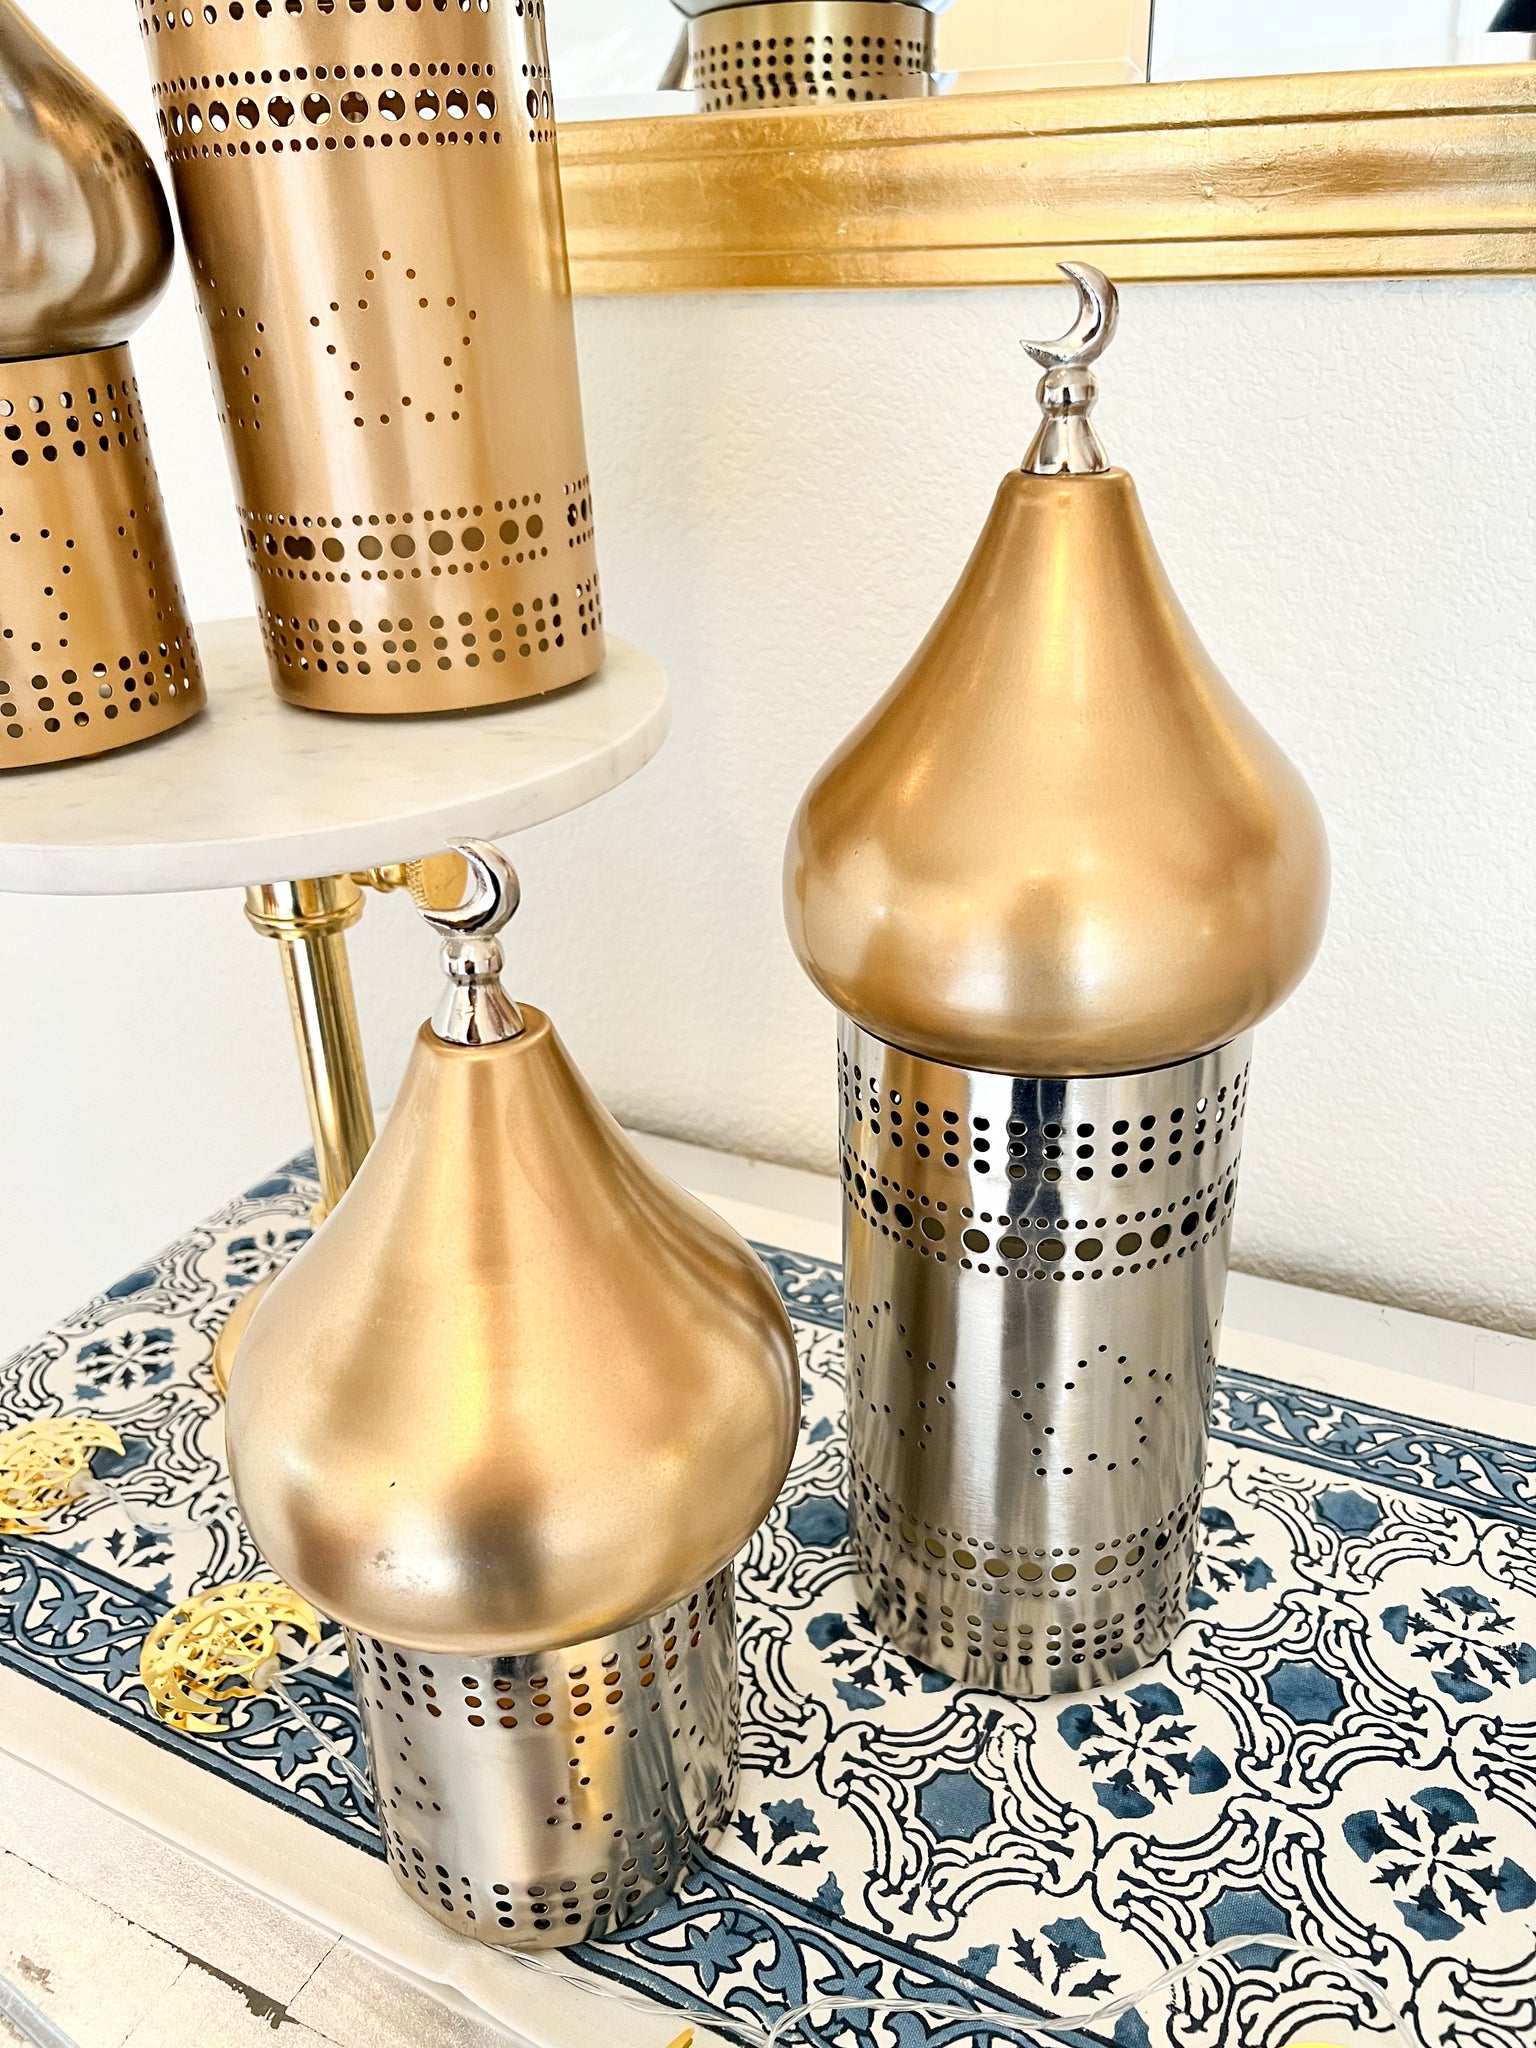 I loved the salt and pepper shakers shaped like minarets. There